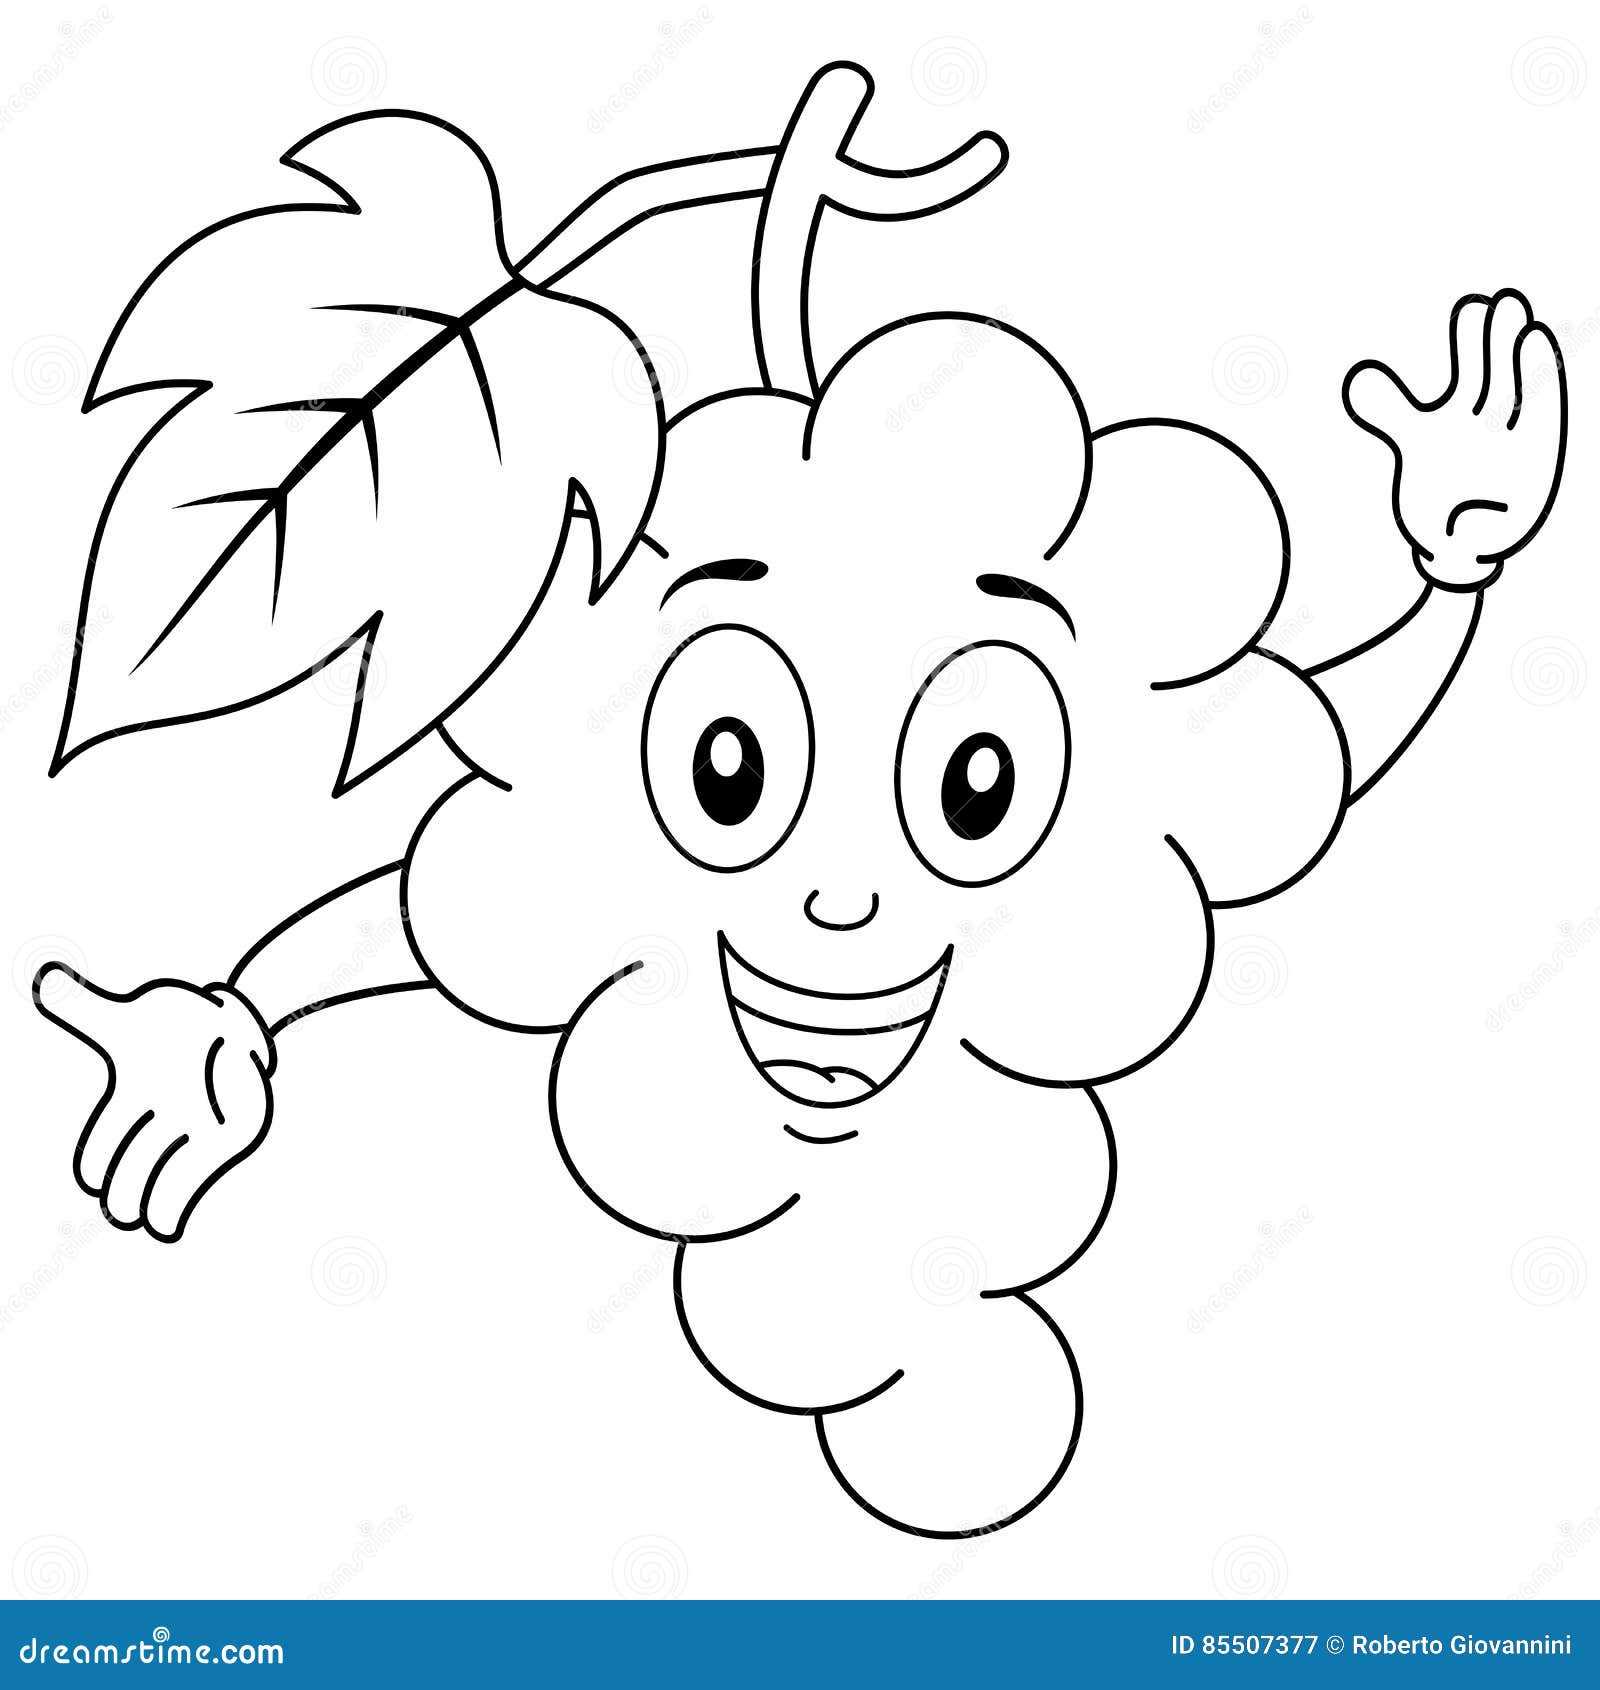 Download Funny Bunch Of Grapes Smiling Character Vector ...